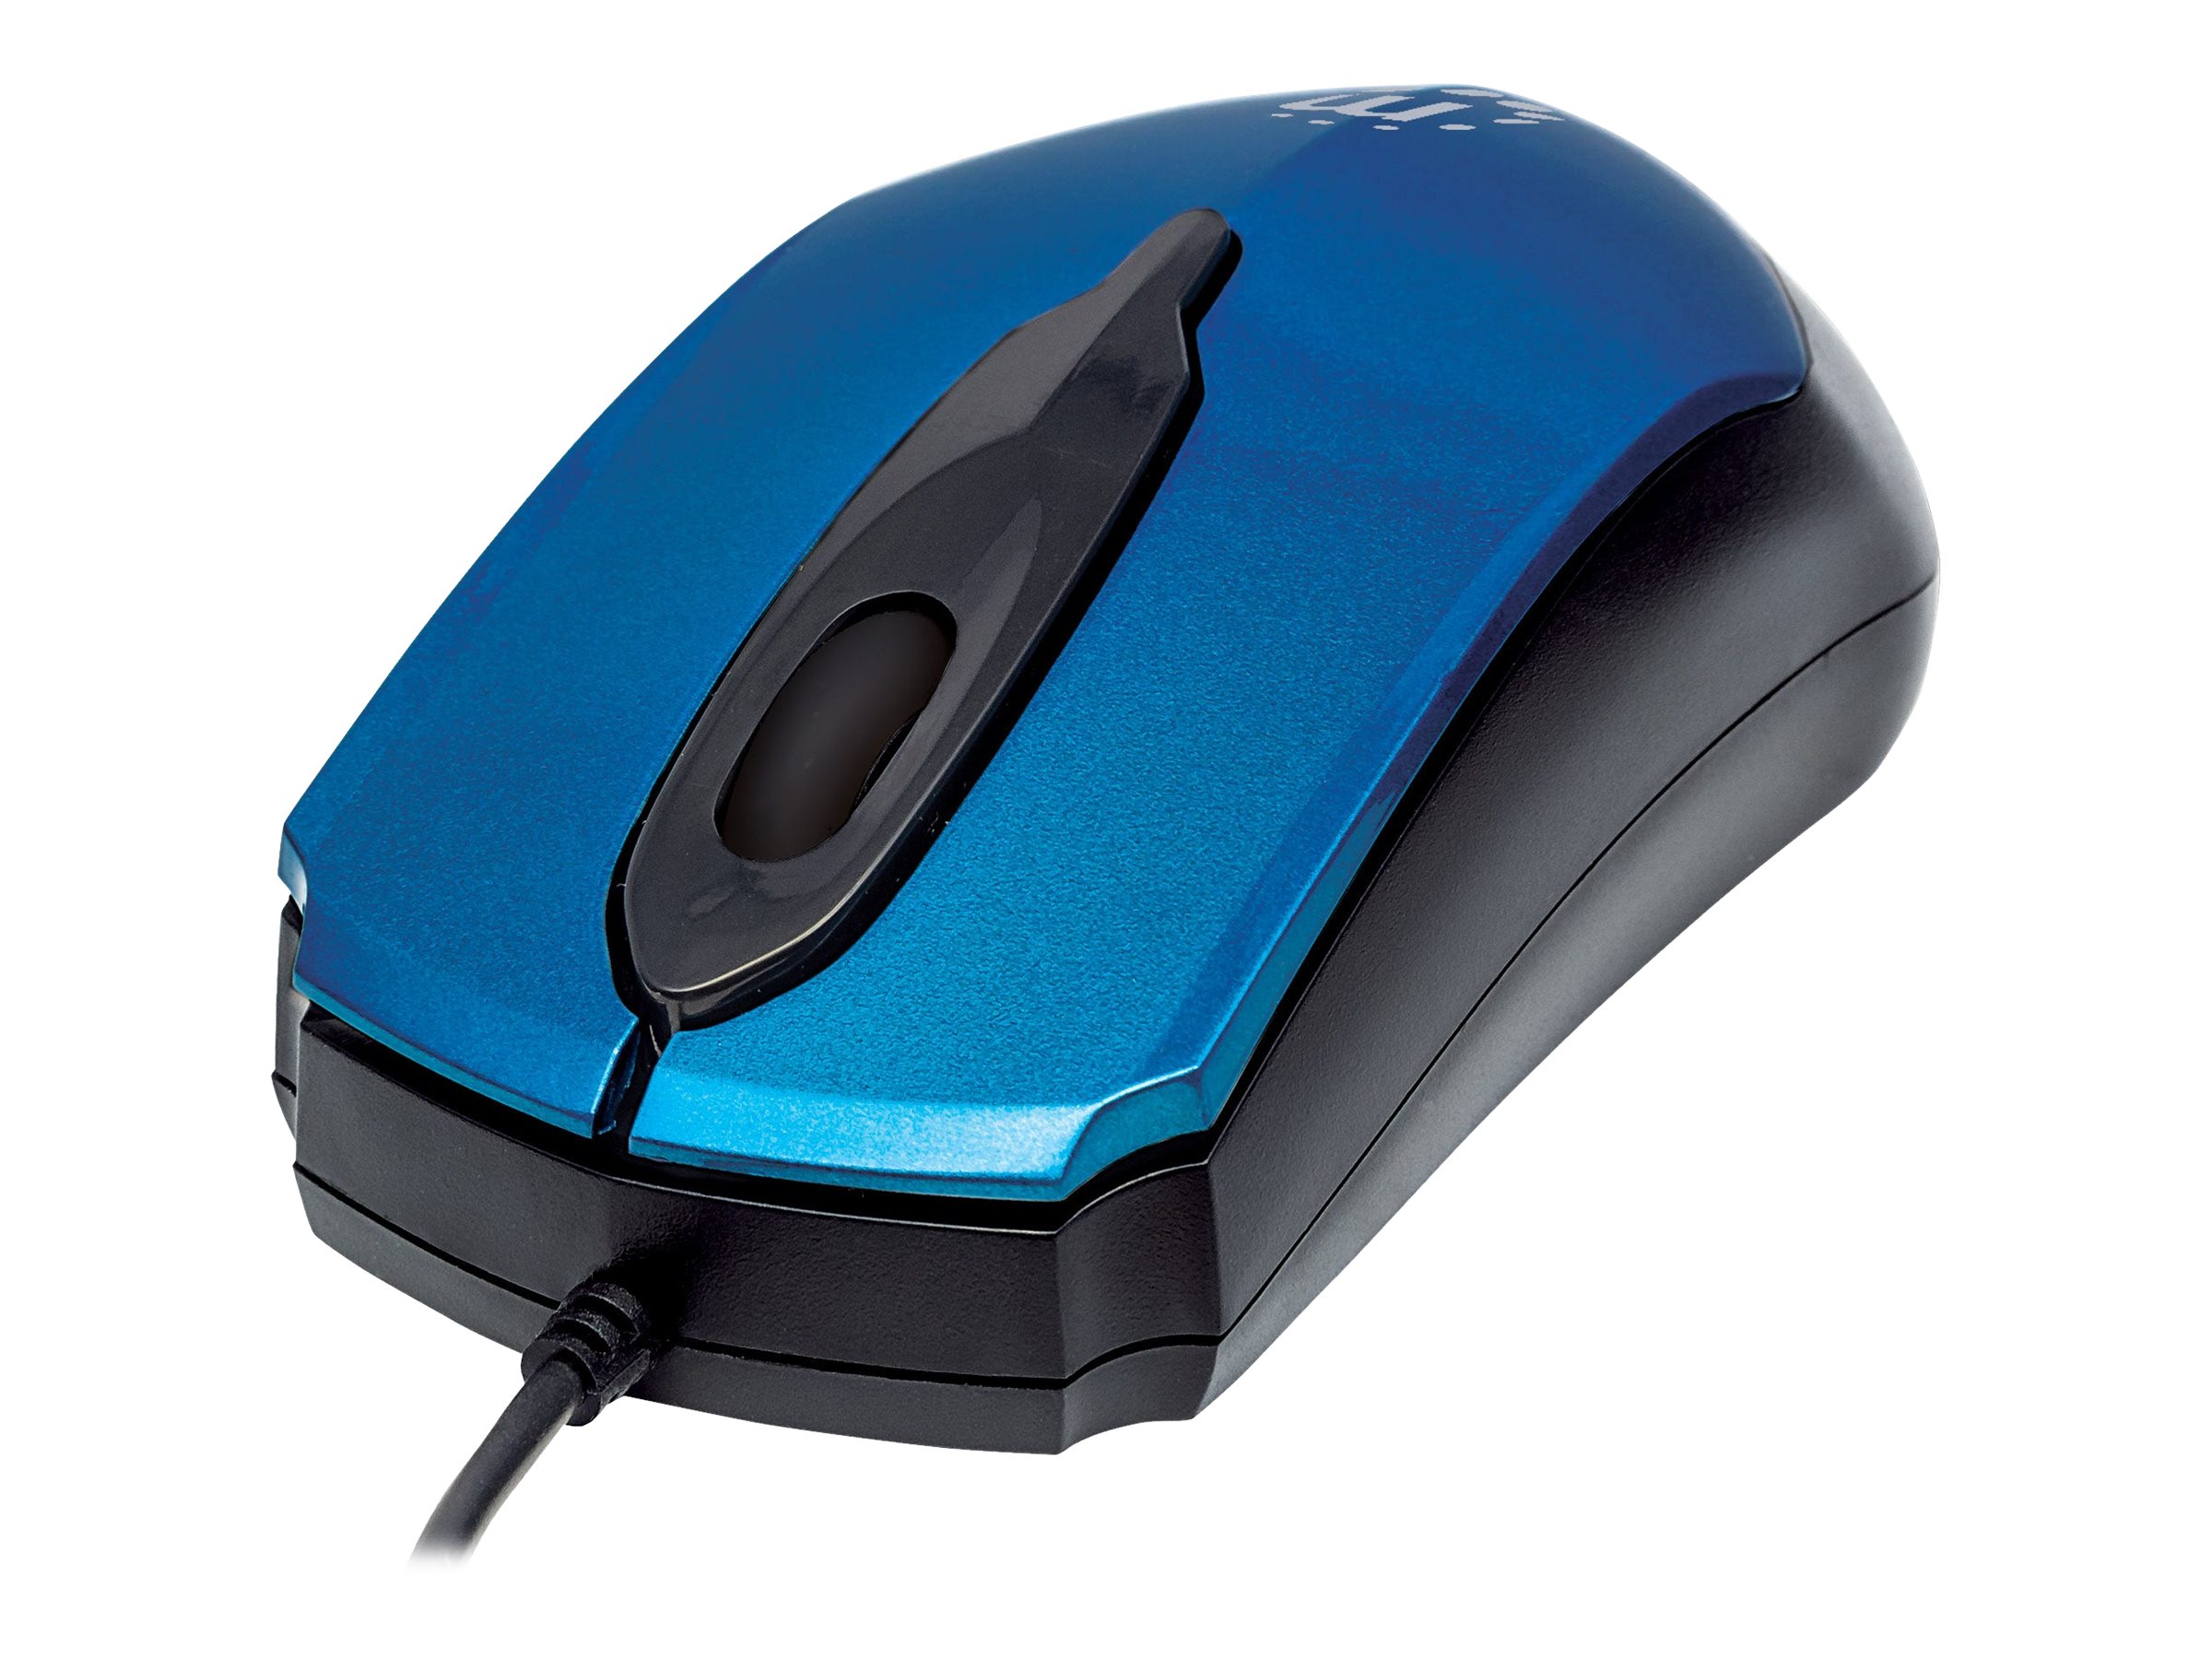 Manhattan Edge USB Wired Mouse, Blue, 1000dpi, USB-A, Optical, Compact, Three Button with Scroll Wheel, Low friction base, Blister